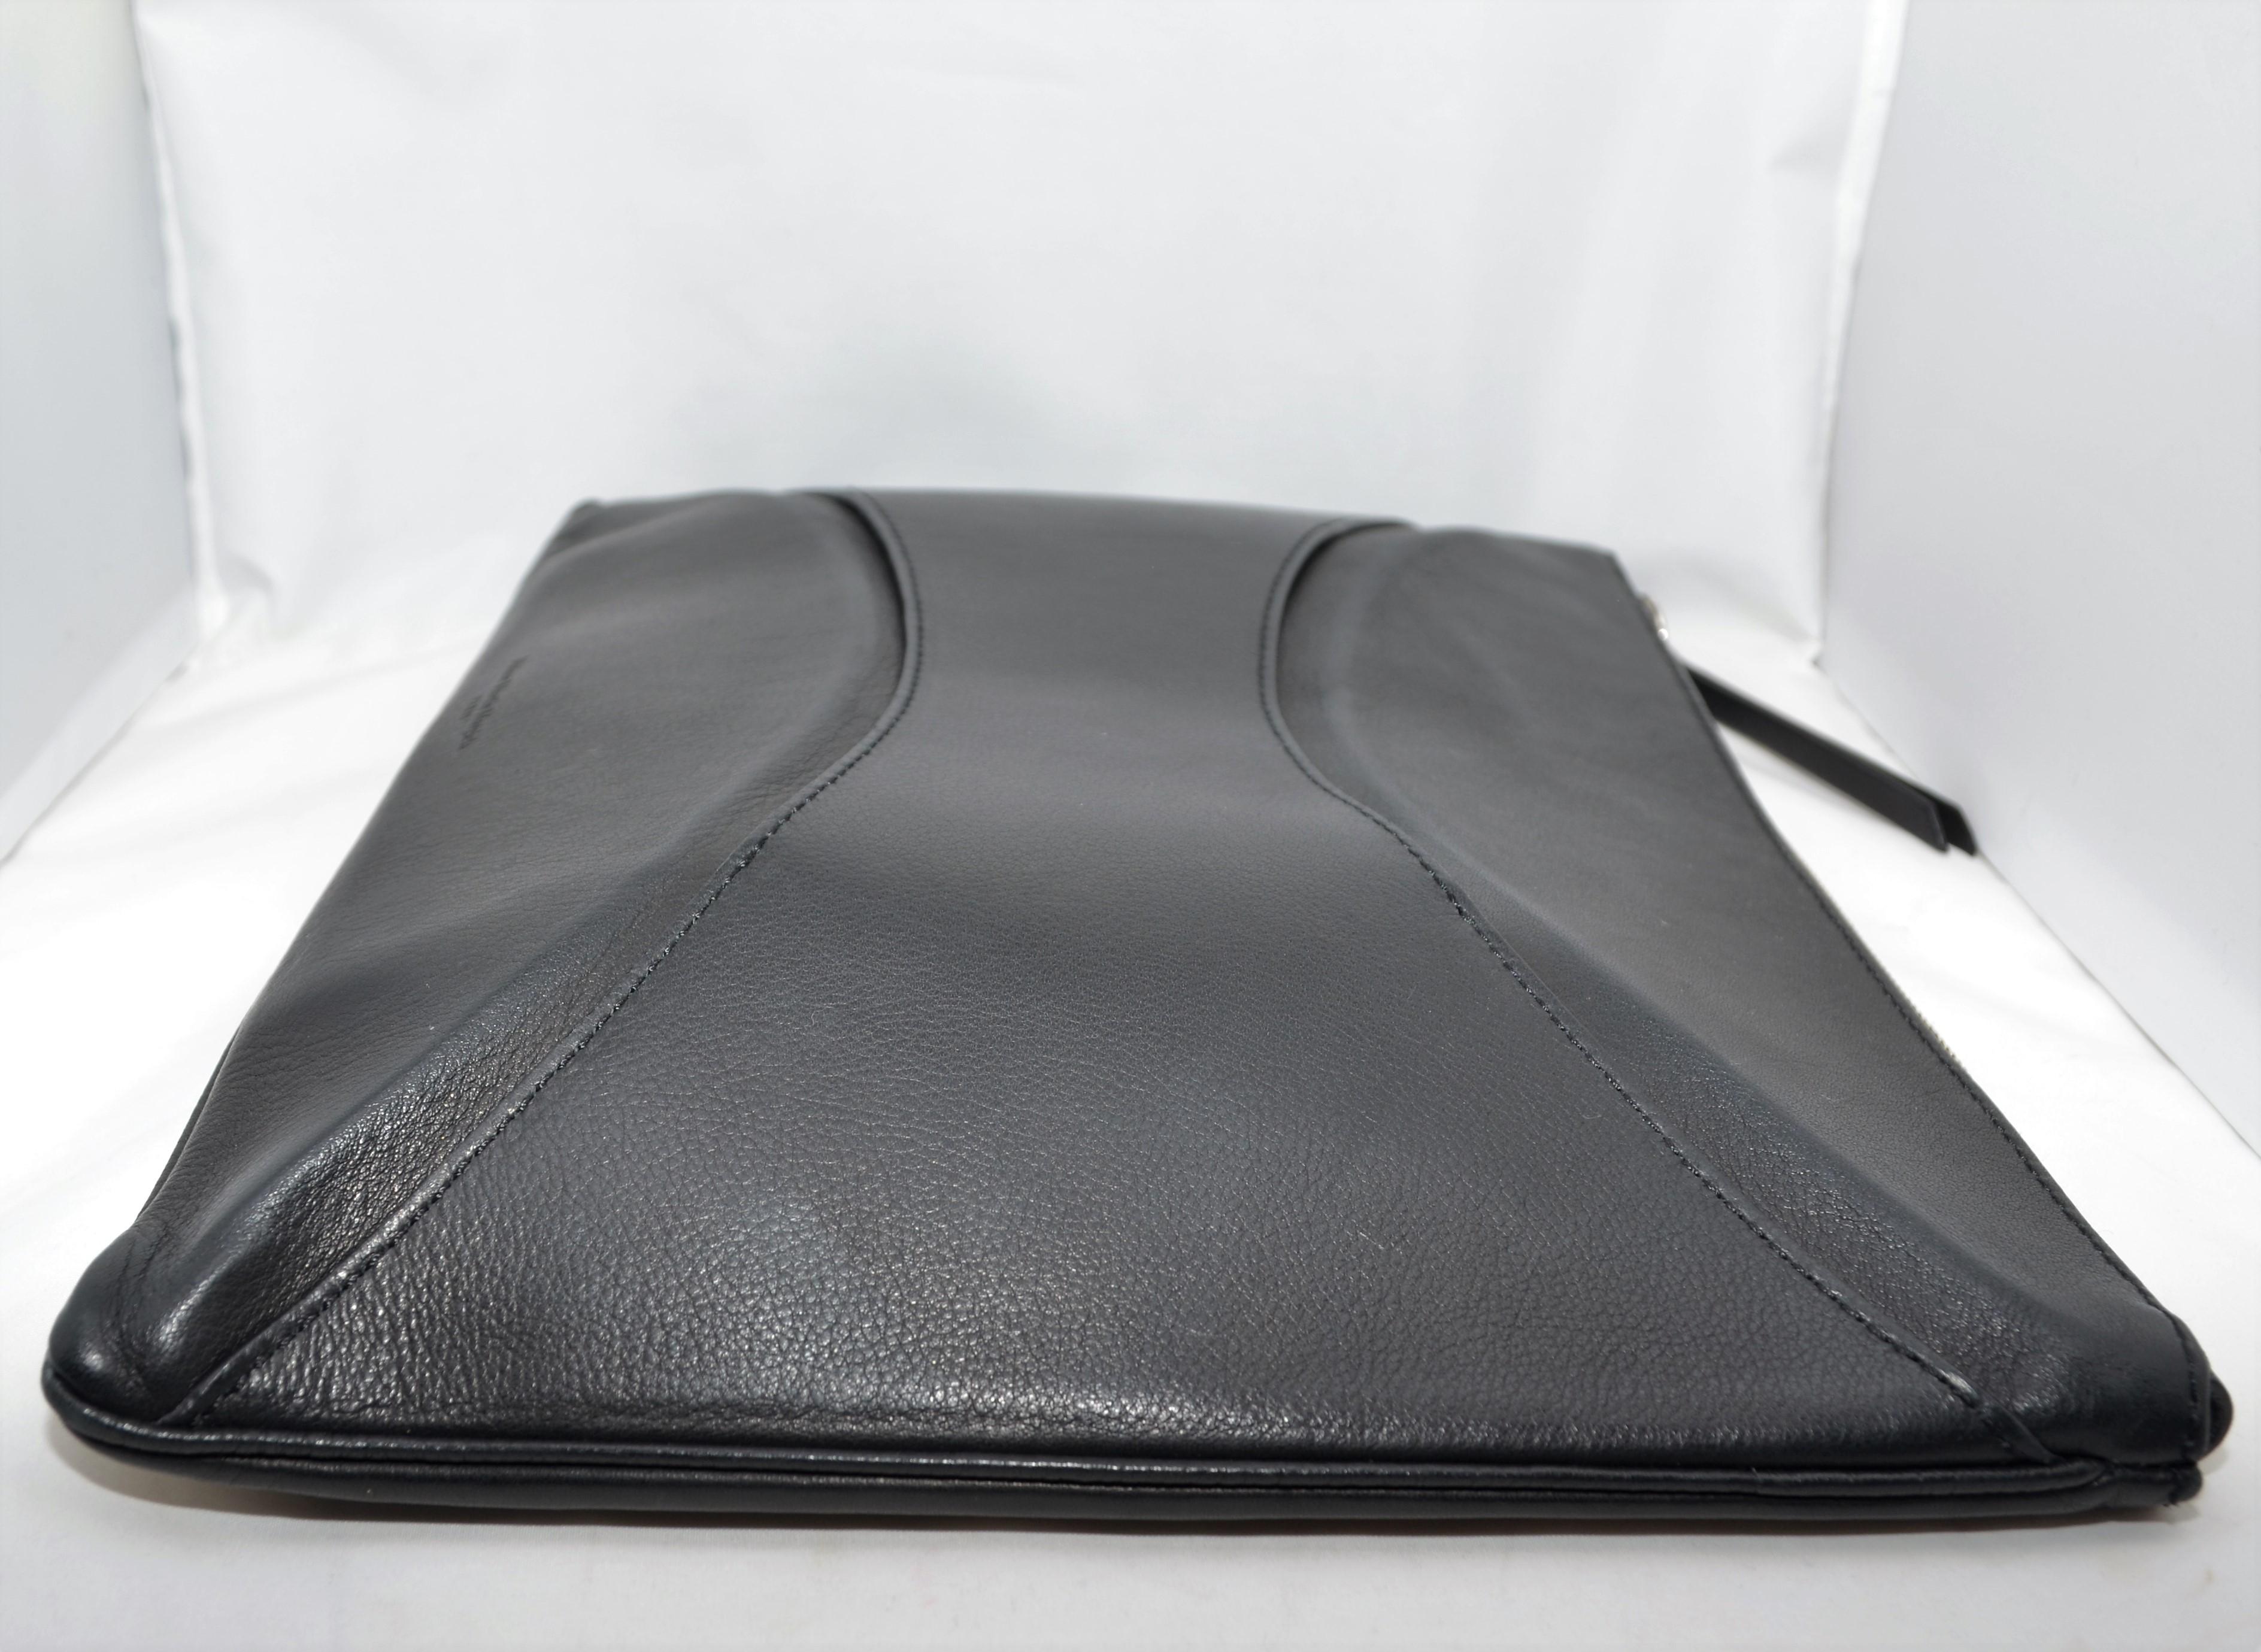 Women's or Men's Maison Martin Margiela Calf Leather Clutch with Strap